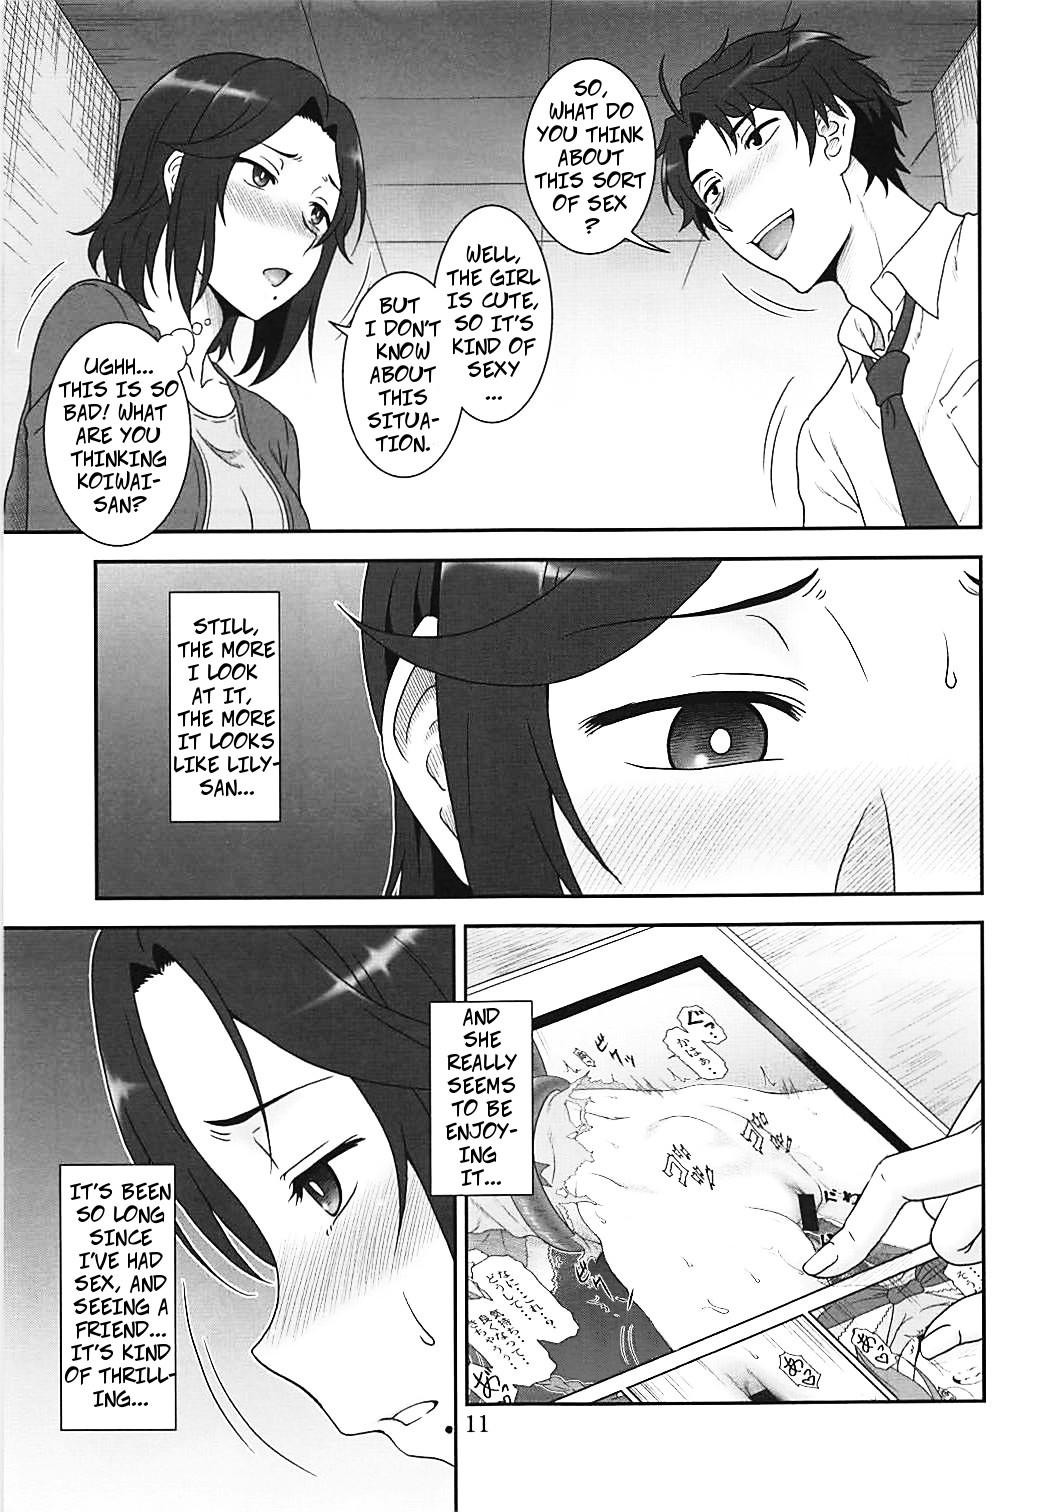 Ametur Porn Recomendation of a Wonderful Sexual Life - Netojuu no susume Gets - Page 3